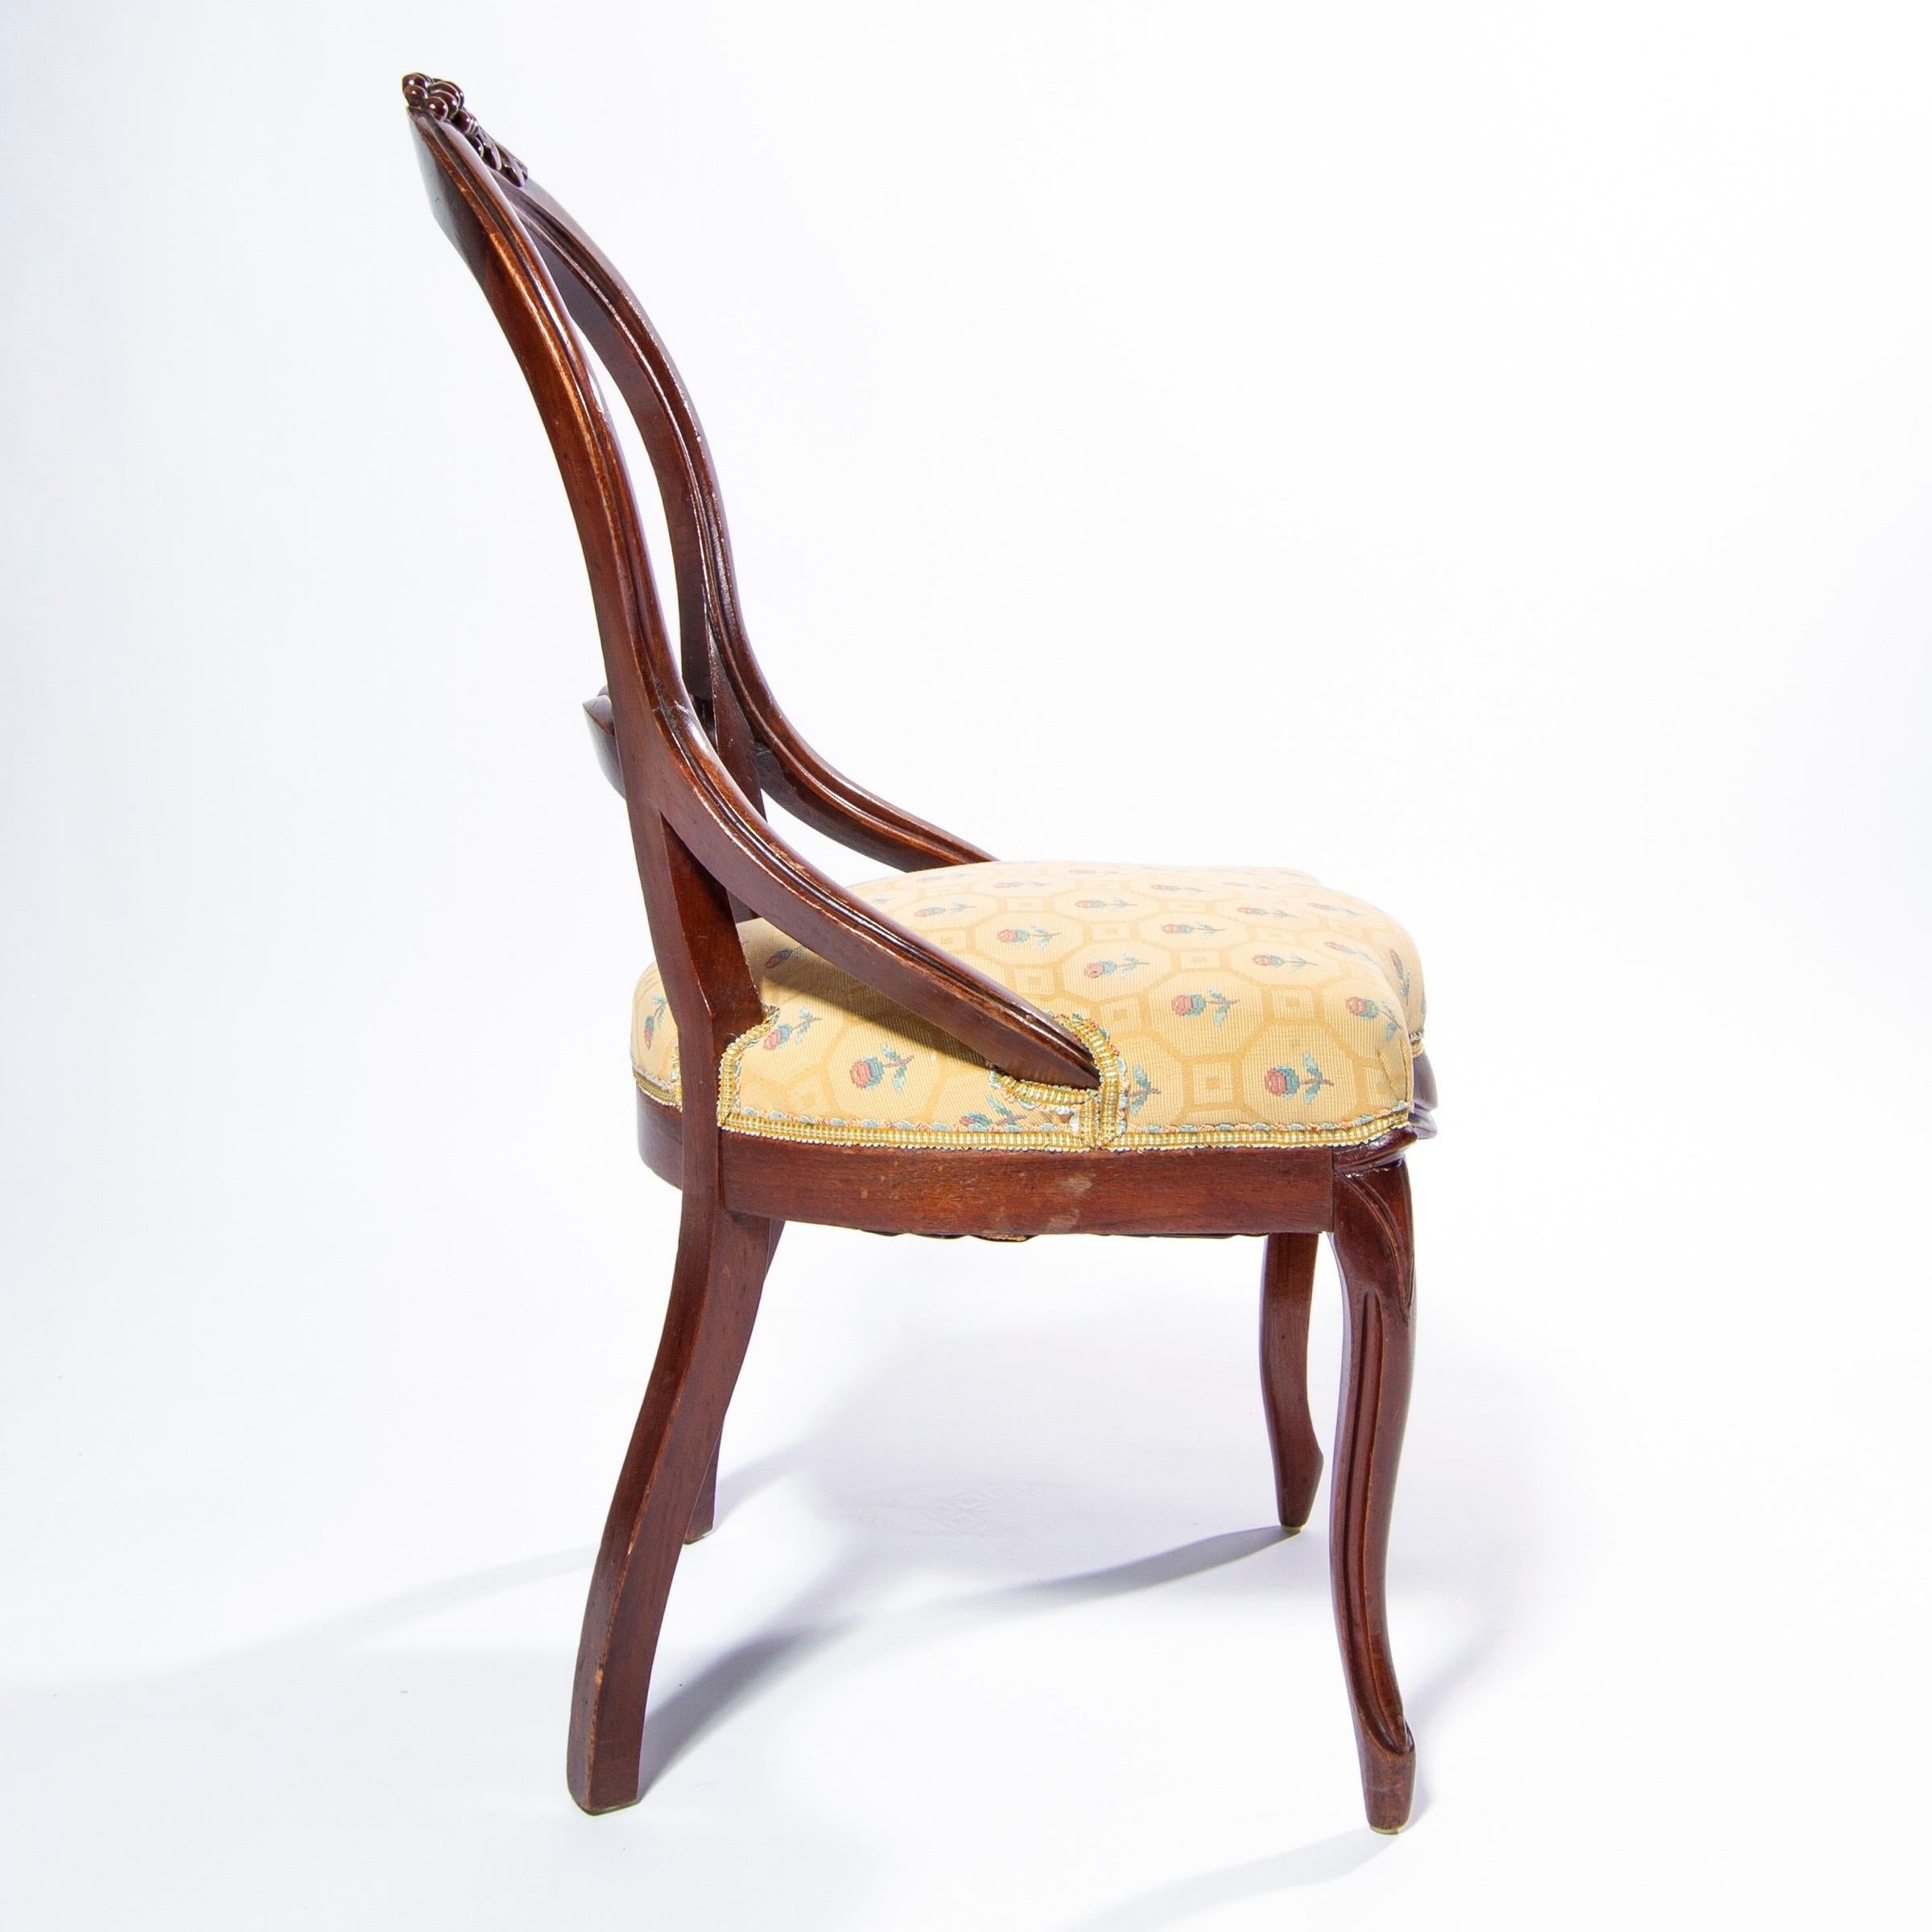 Hand-Carved Hand Carved Walnut Queen Anne Chair with Grape motif, England